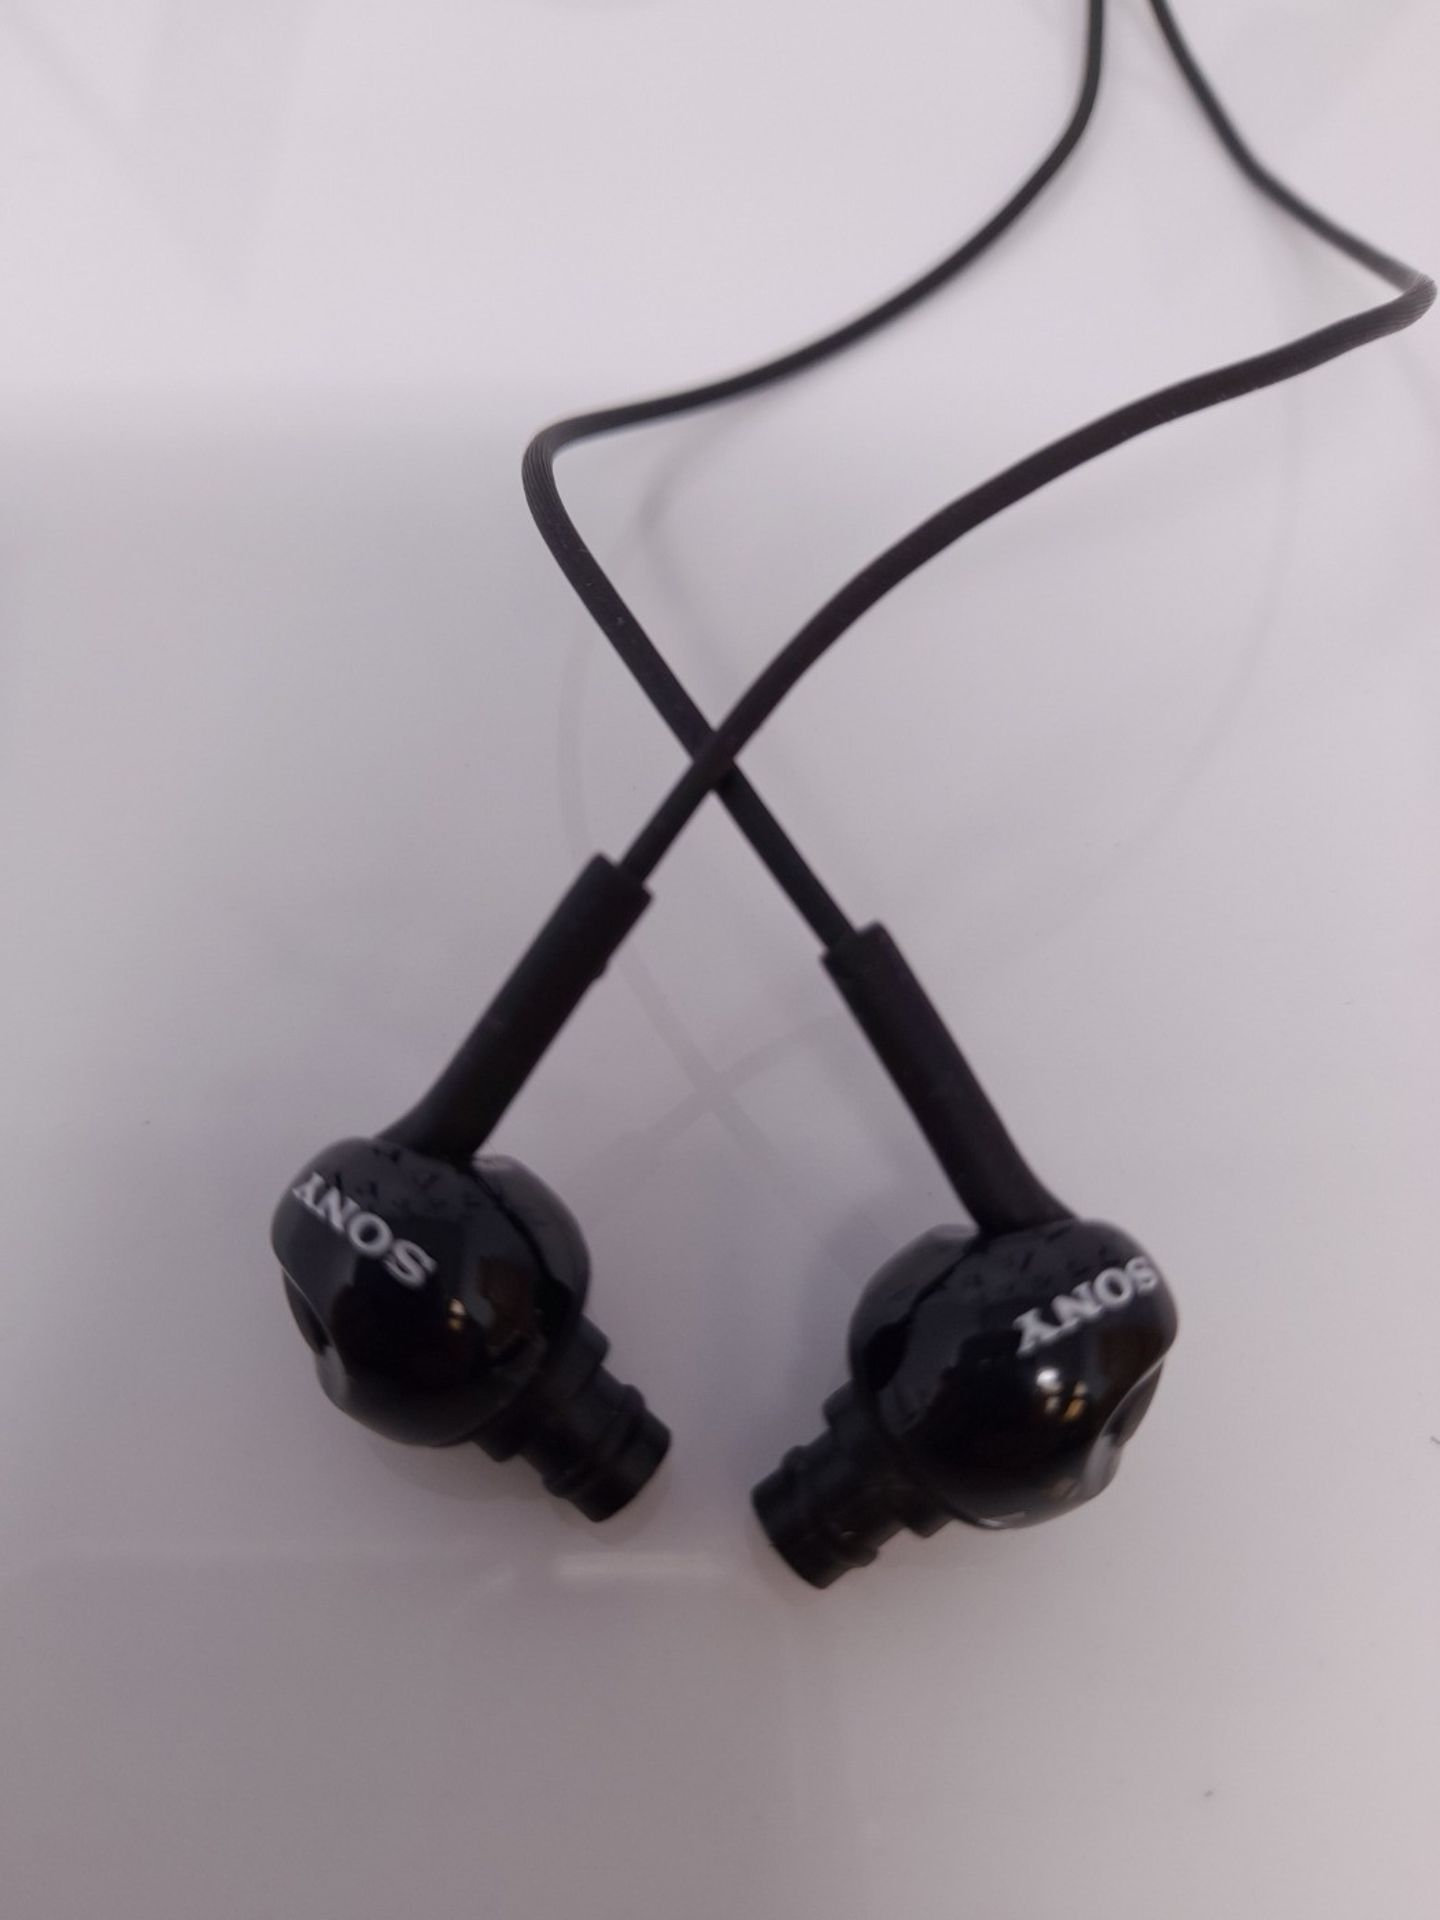 Sony MDREX110APB.CE7 Deep Bass Earphones with Smartphone Control and Mic - Metallic Bl - Image 3 of 3